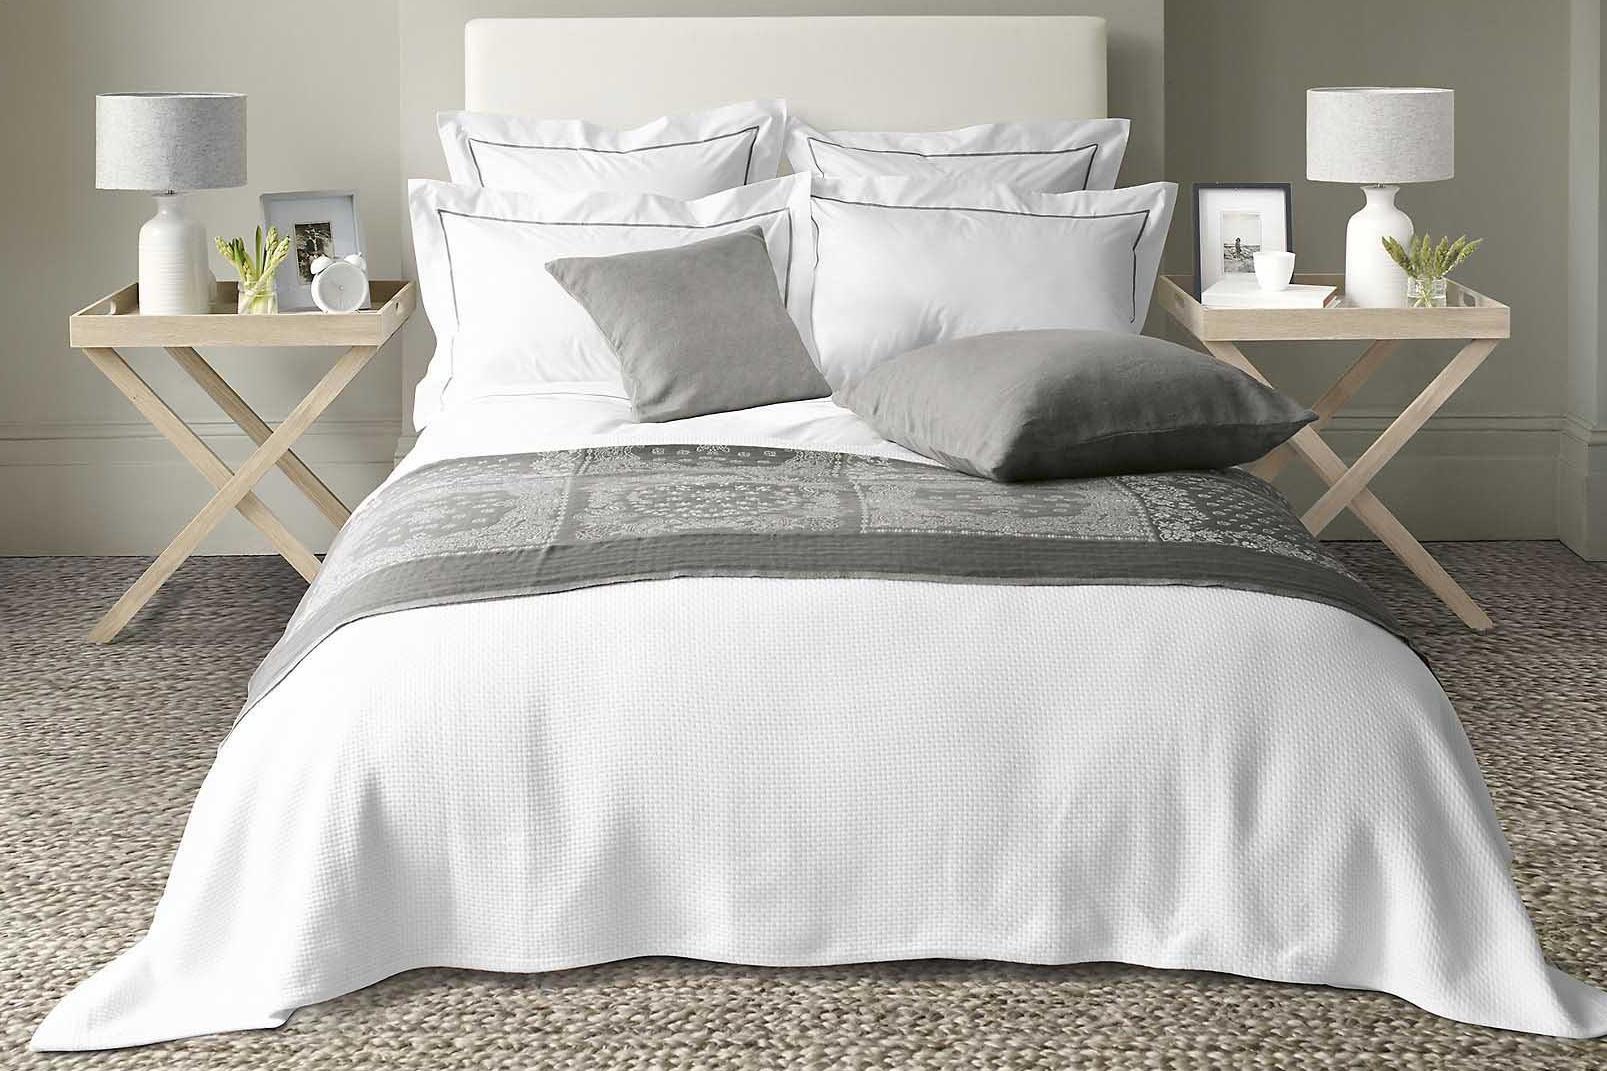 Single Flat Sheet-LUXURY PERCALE by Helena Springfield-Quality Bed Linen-CREAM